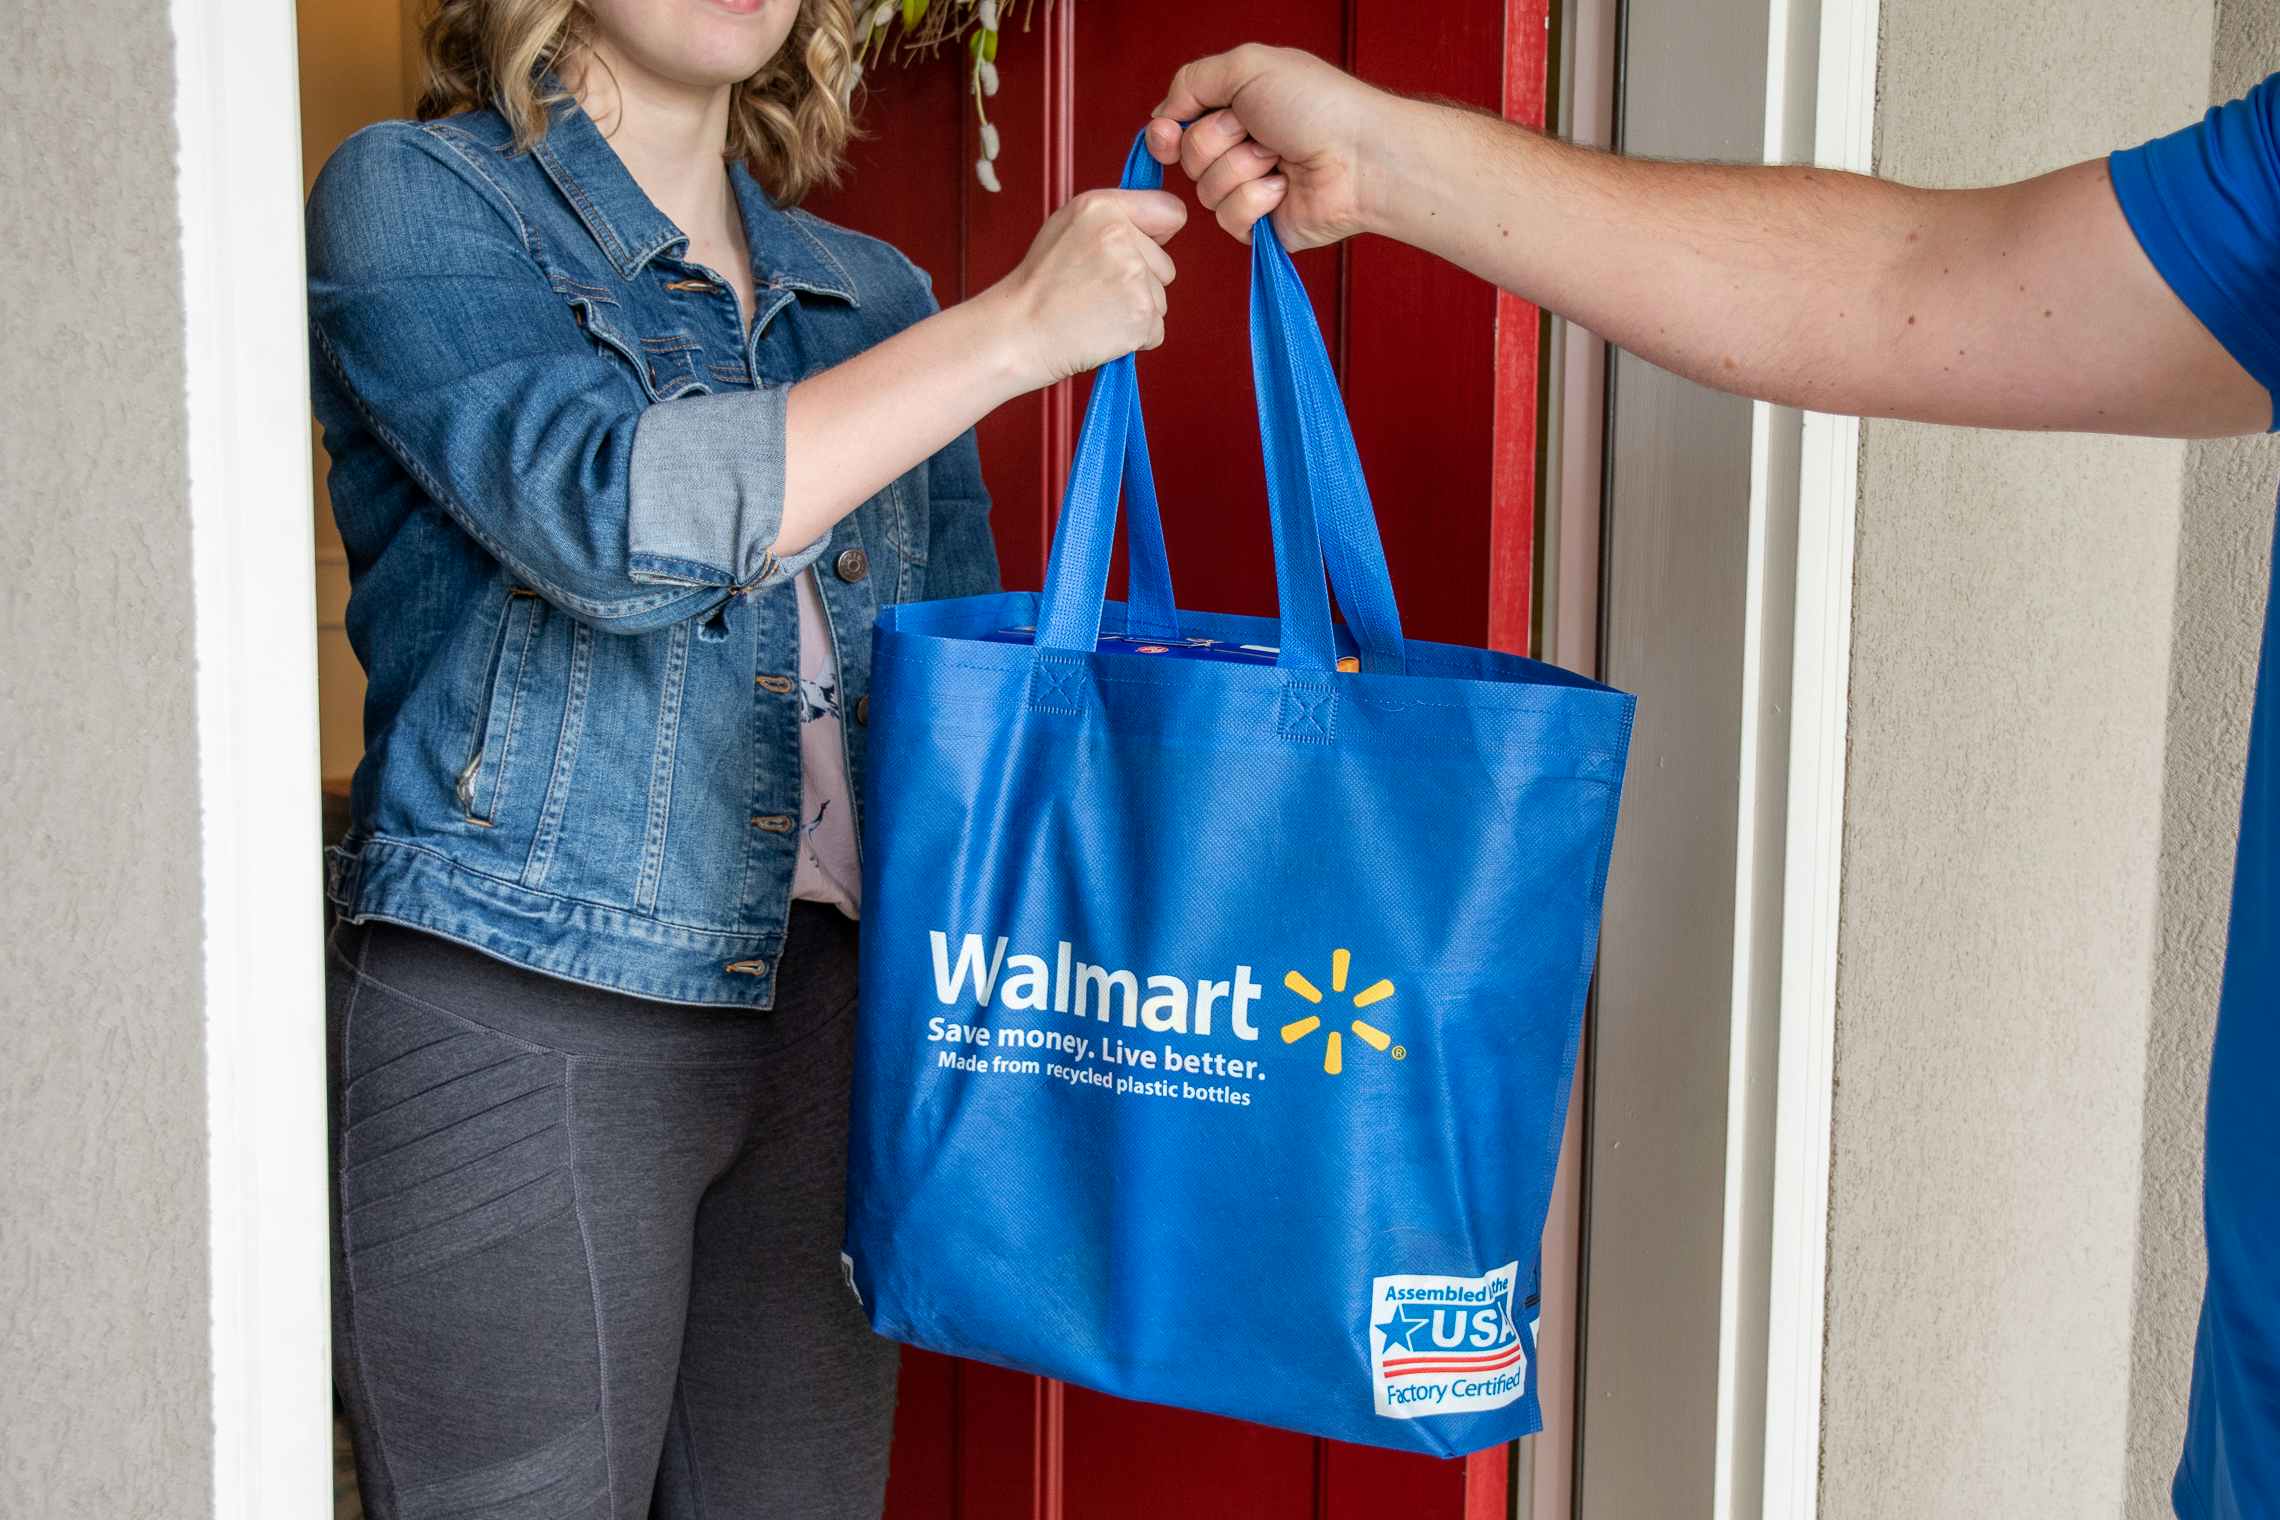 A Walmart delivery employee handing a shopping bag to a customer at their front door.